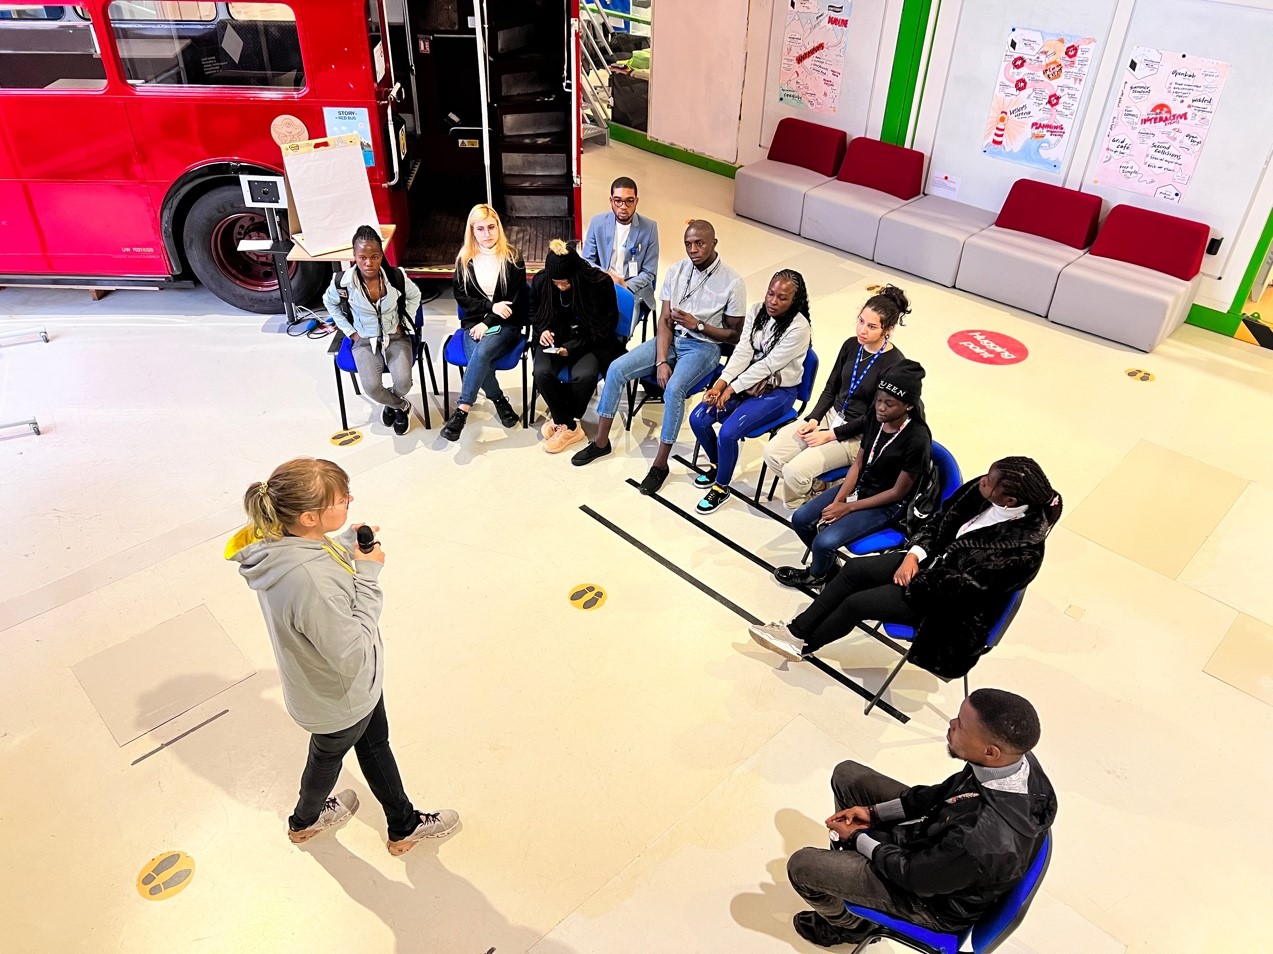 youth innovators meet at CERN’s iconic IdeaSquare innovation space